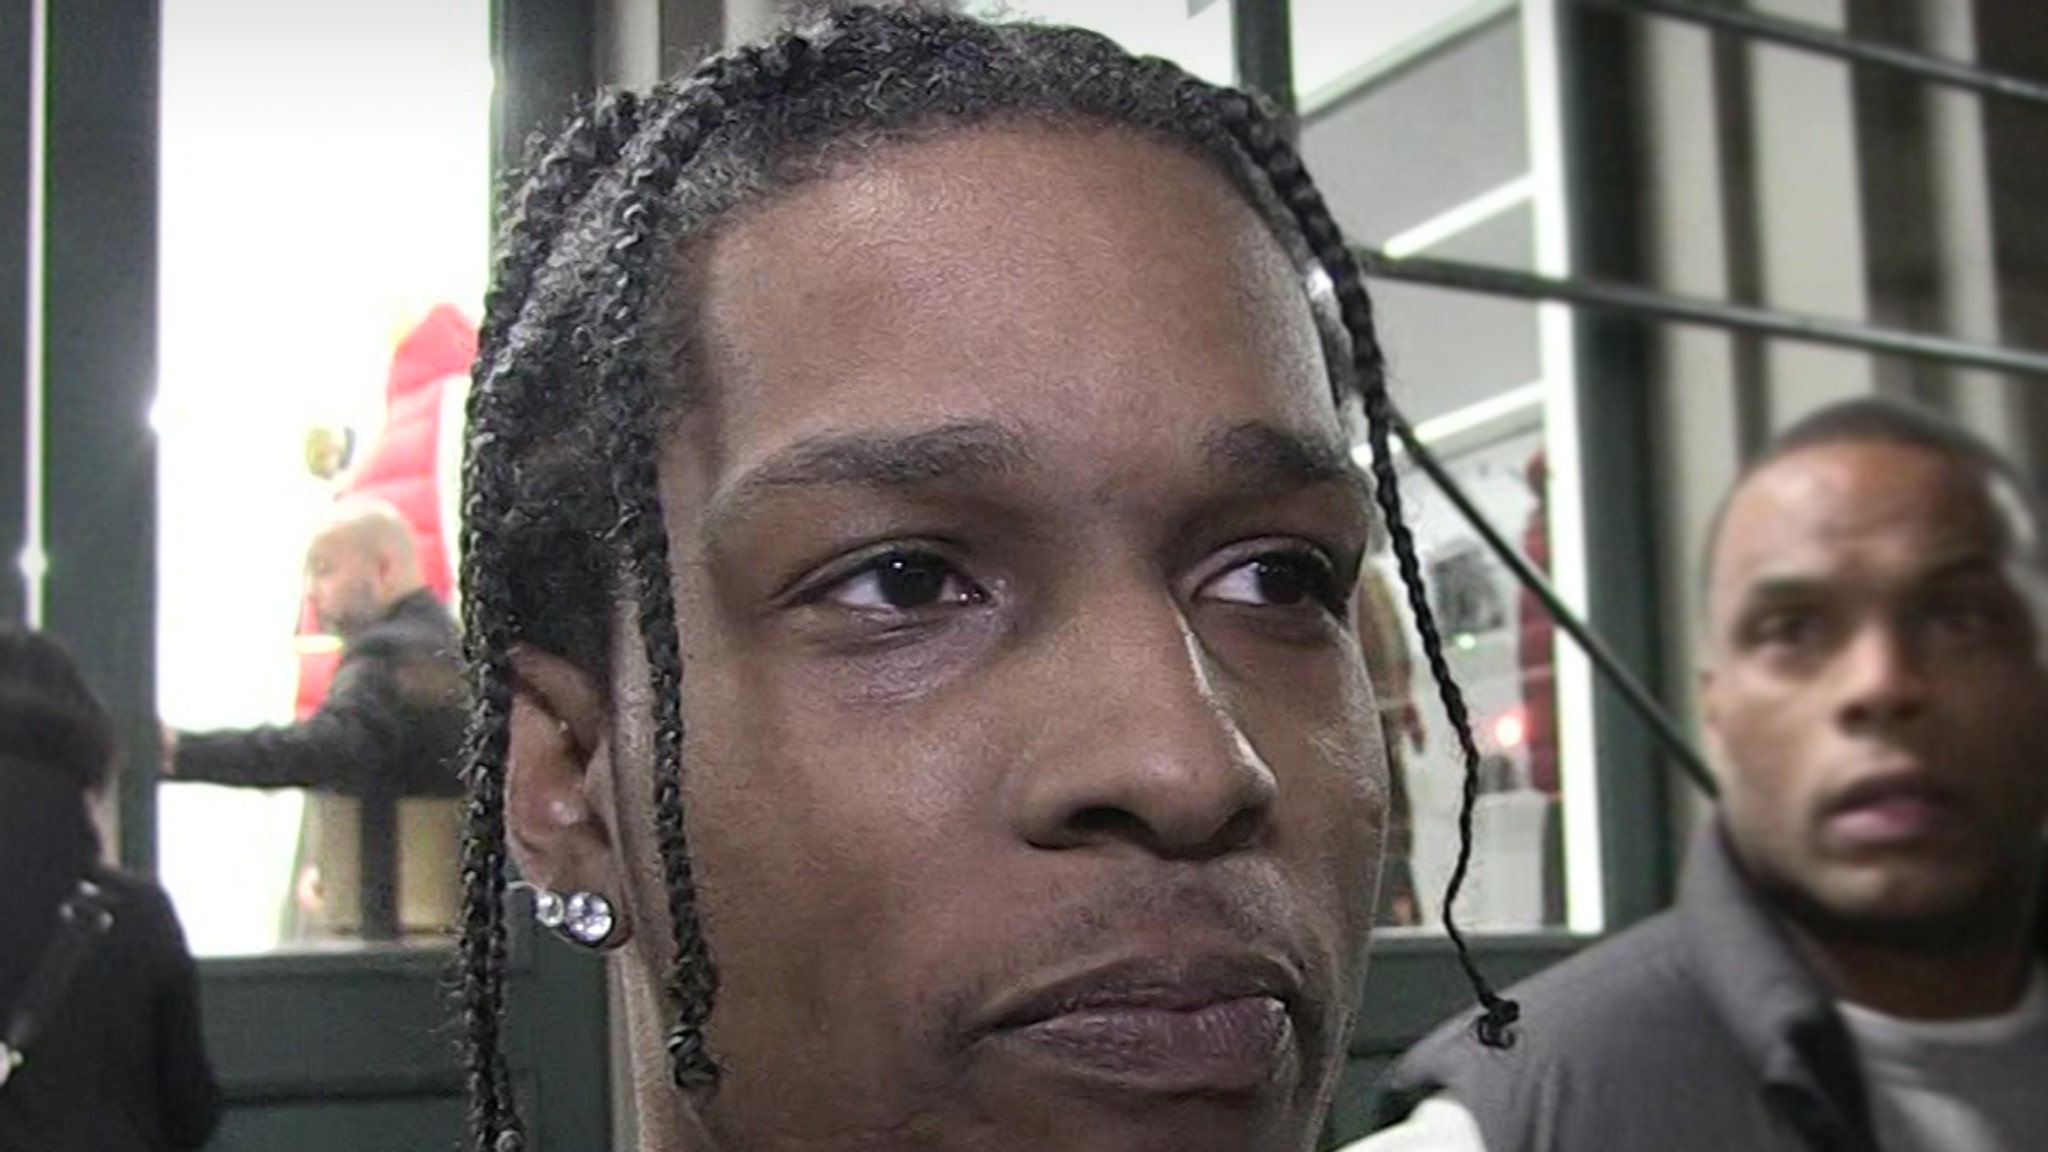 A$AP Rocky Says He Didn't Commit a Crime, Says He's Getting Extorted